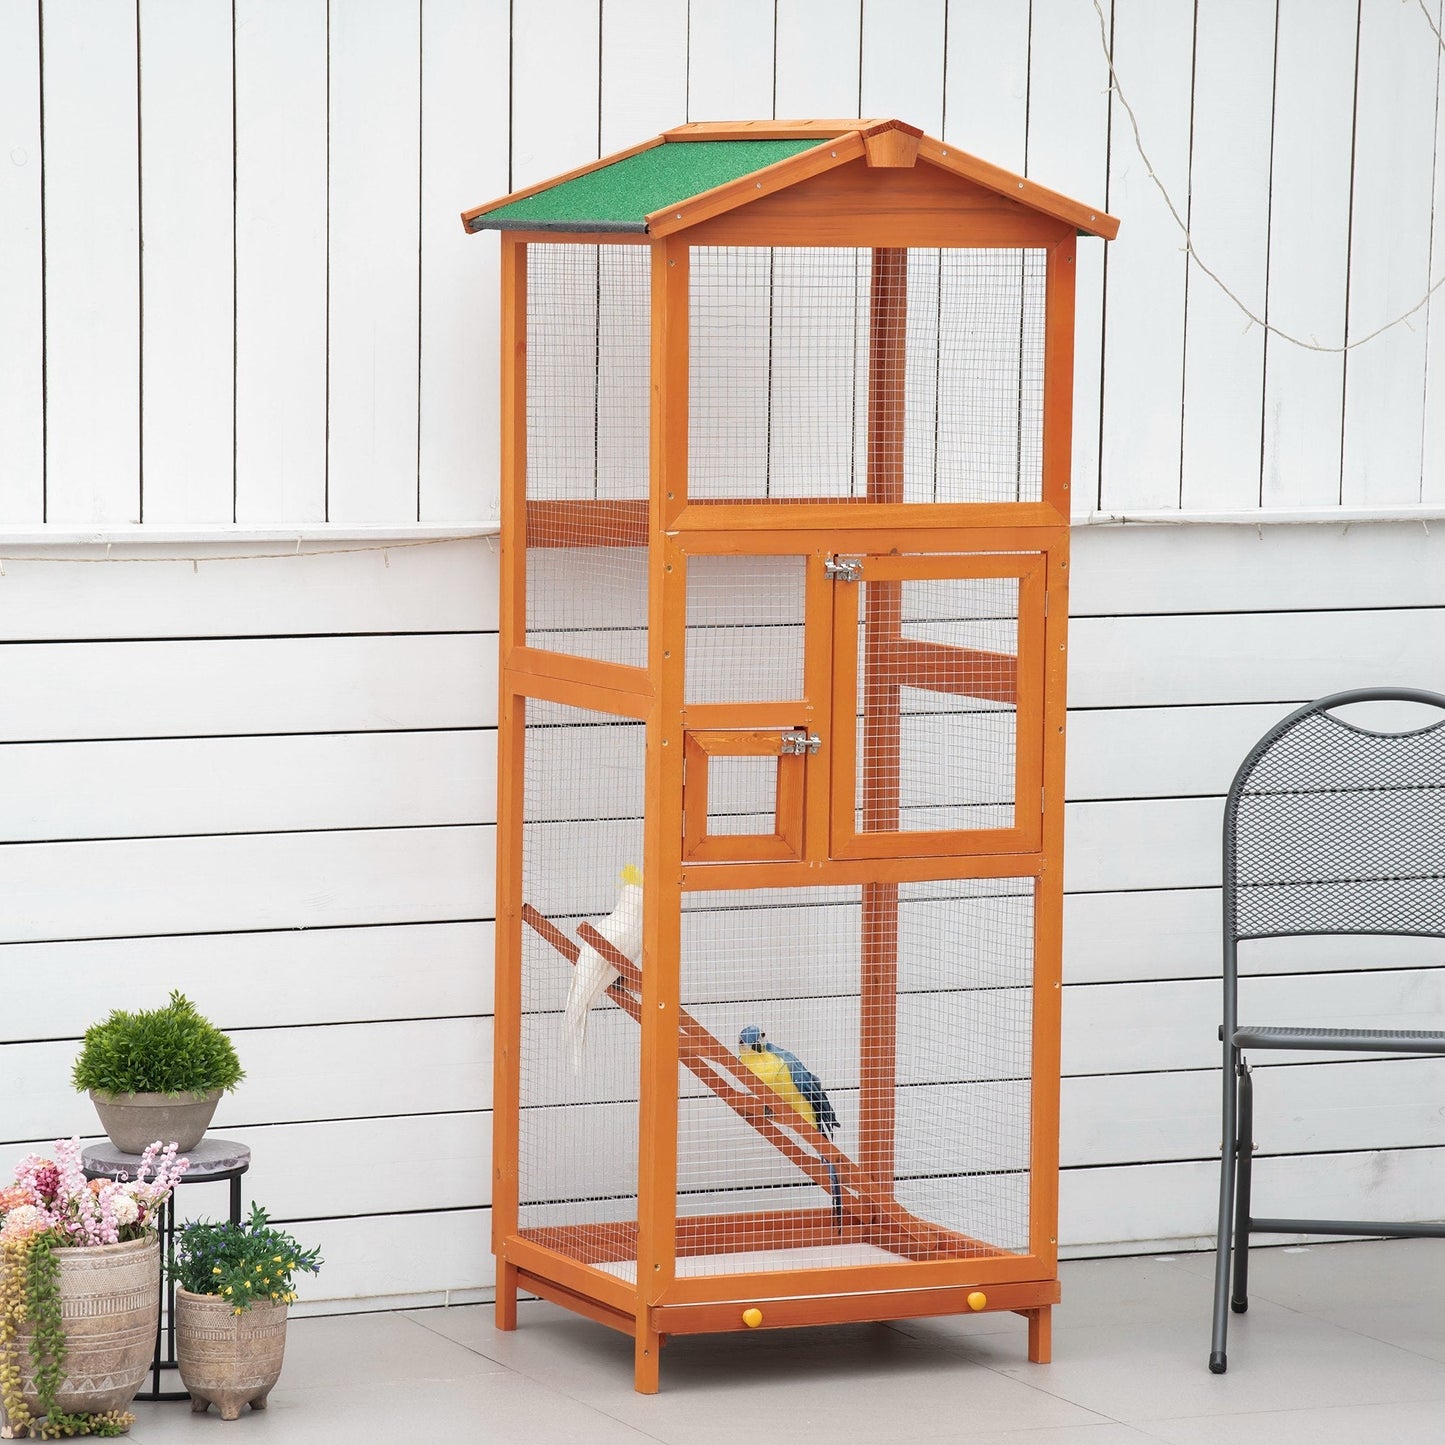 PAWHUT CAGE FOR BRIVER 165CM HIGH WOOD WOOD WITH 2 DOORS AND TRACK TRISTABLE, Orange